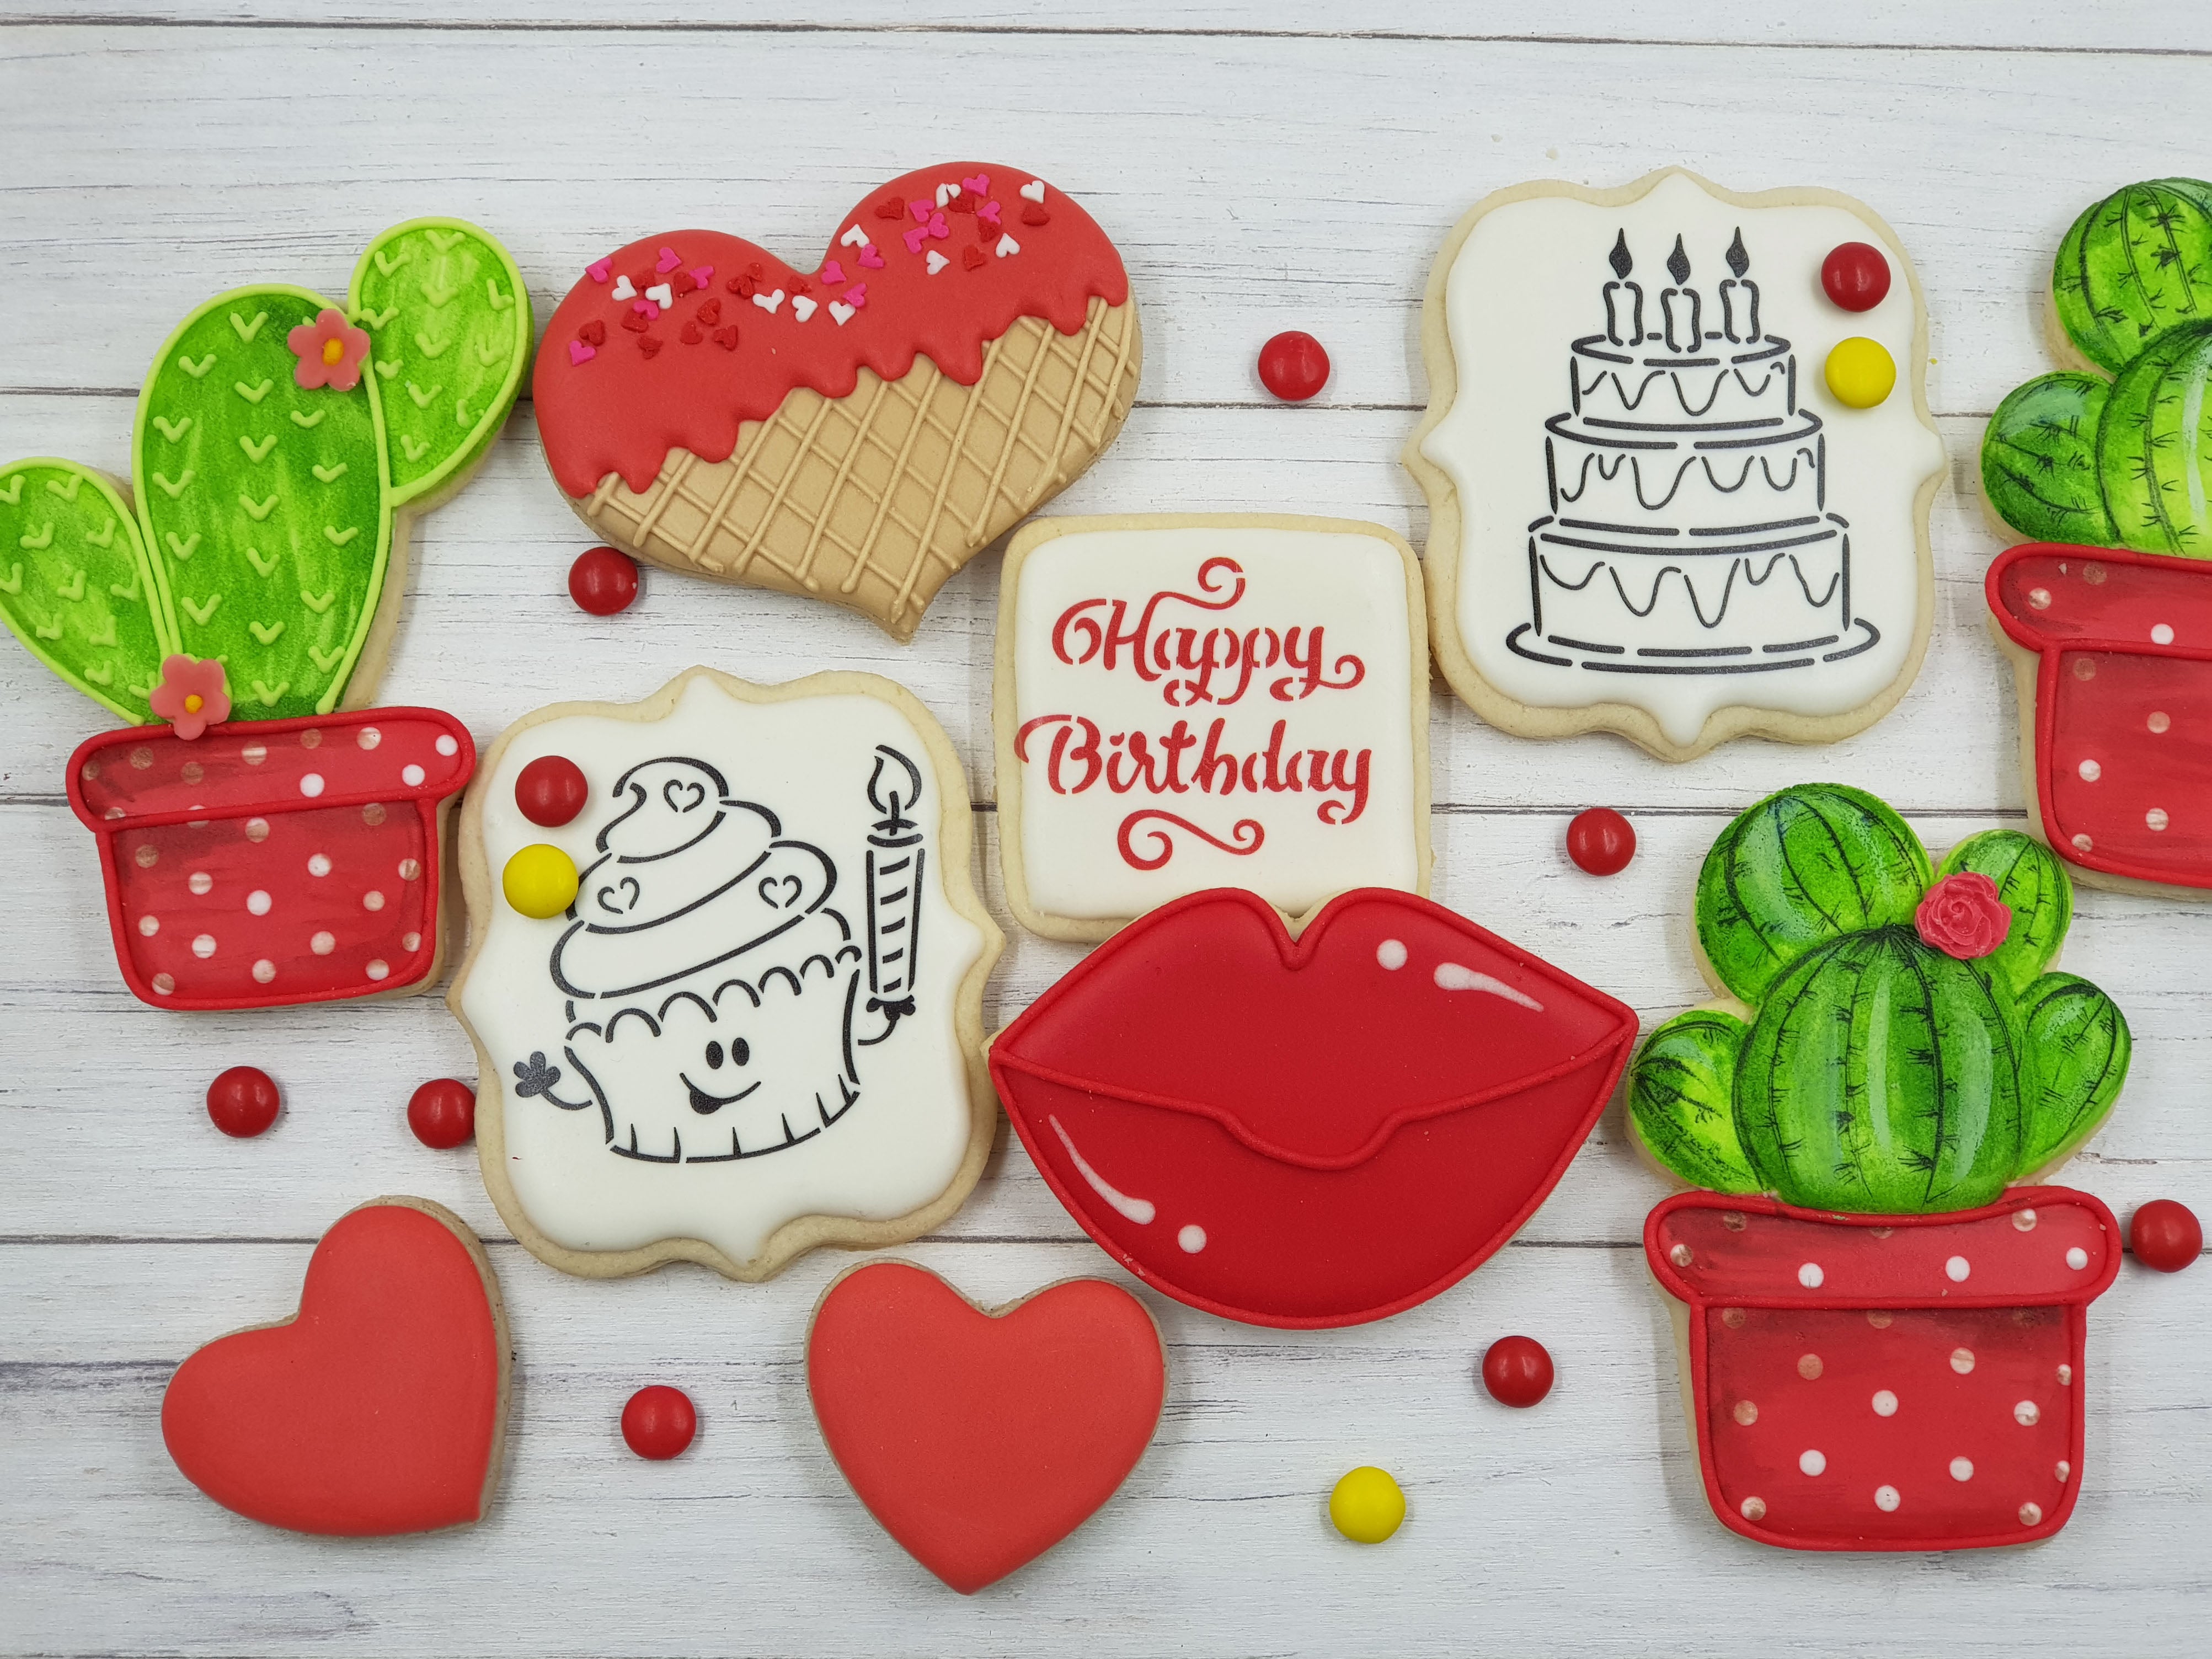 Happy Birthday with Cake DIY Cookie Wall Craft Stencil - 11.5 Inch